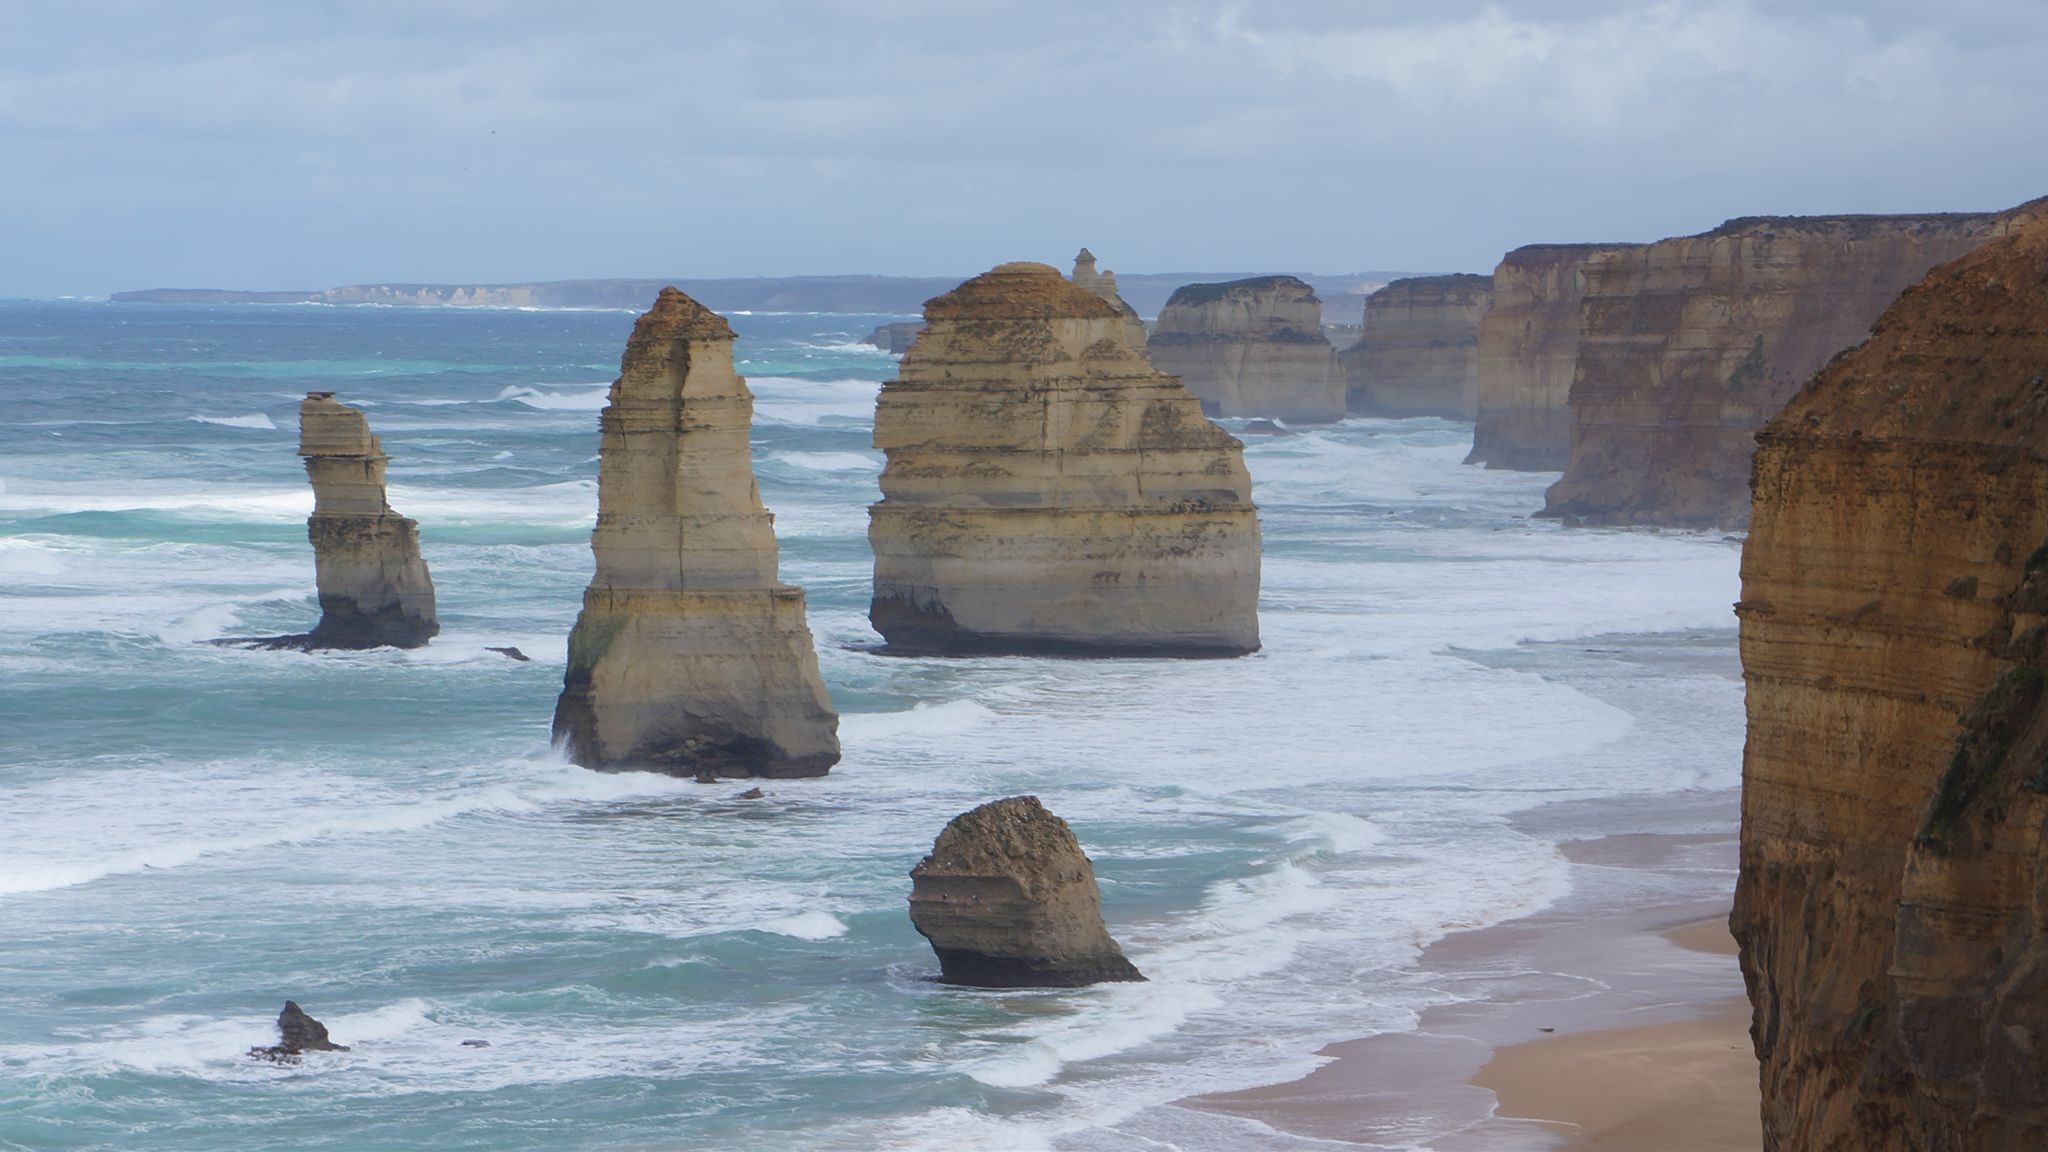 The Search for the Twelve Apostles